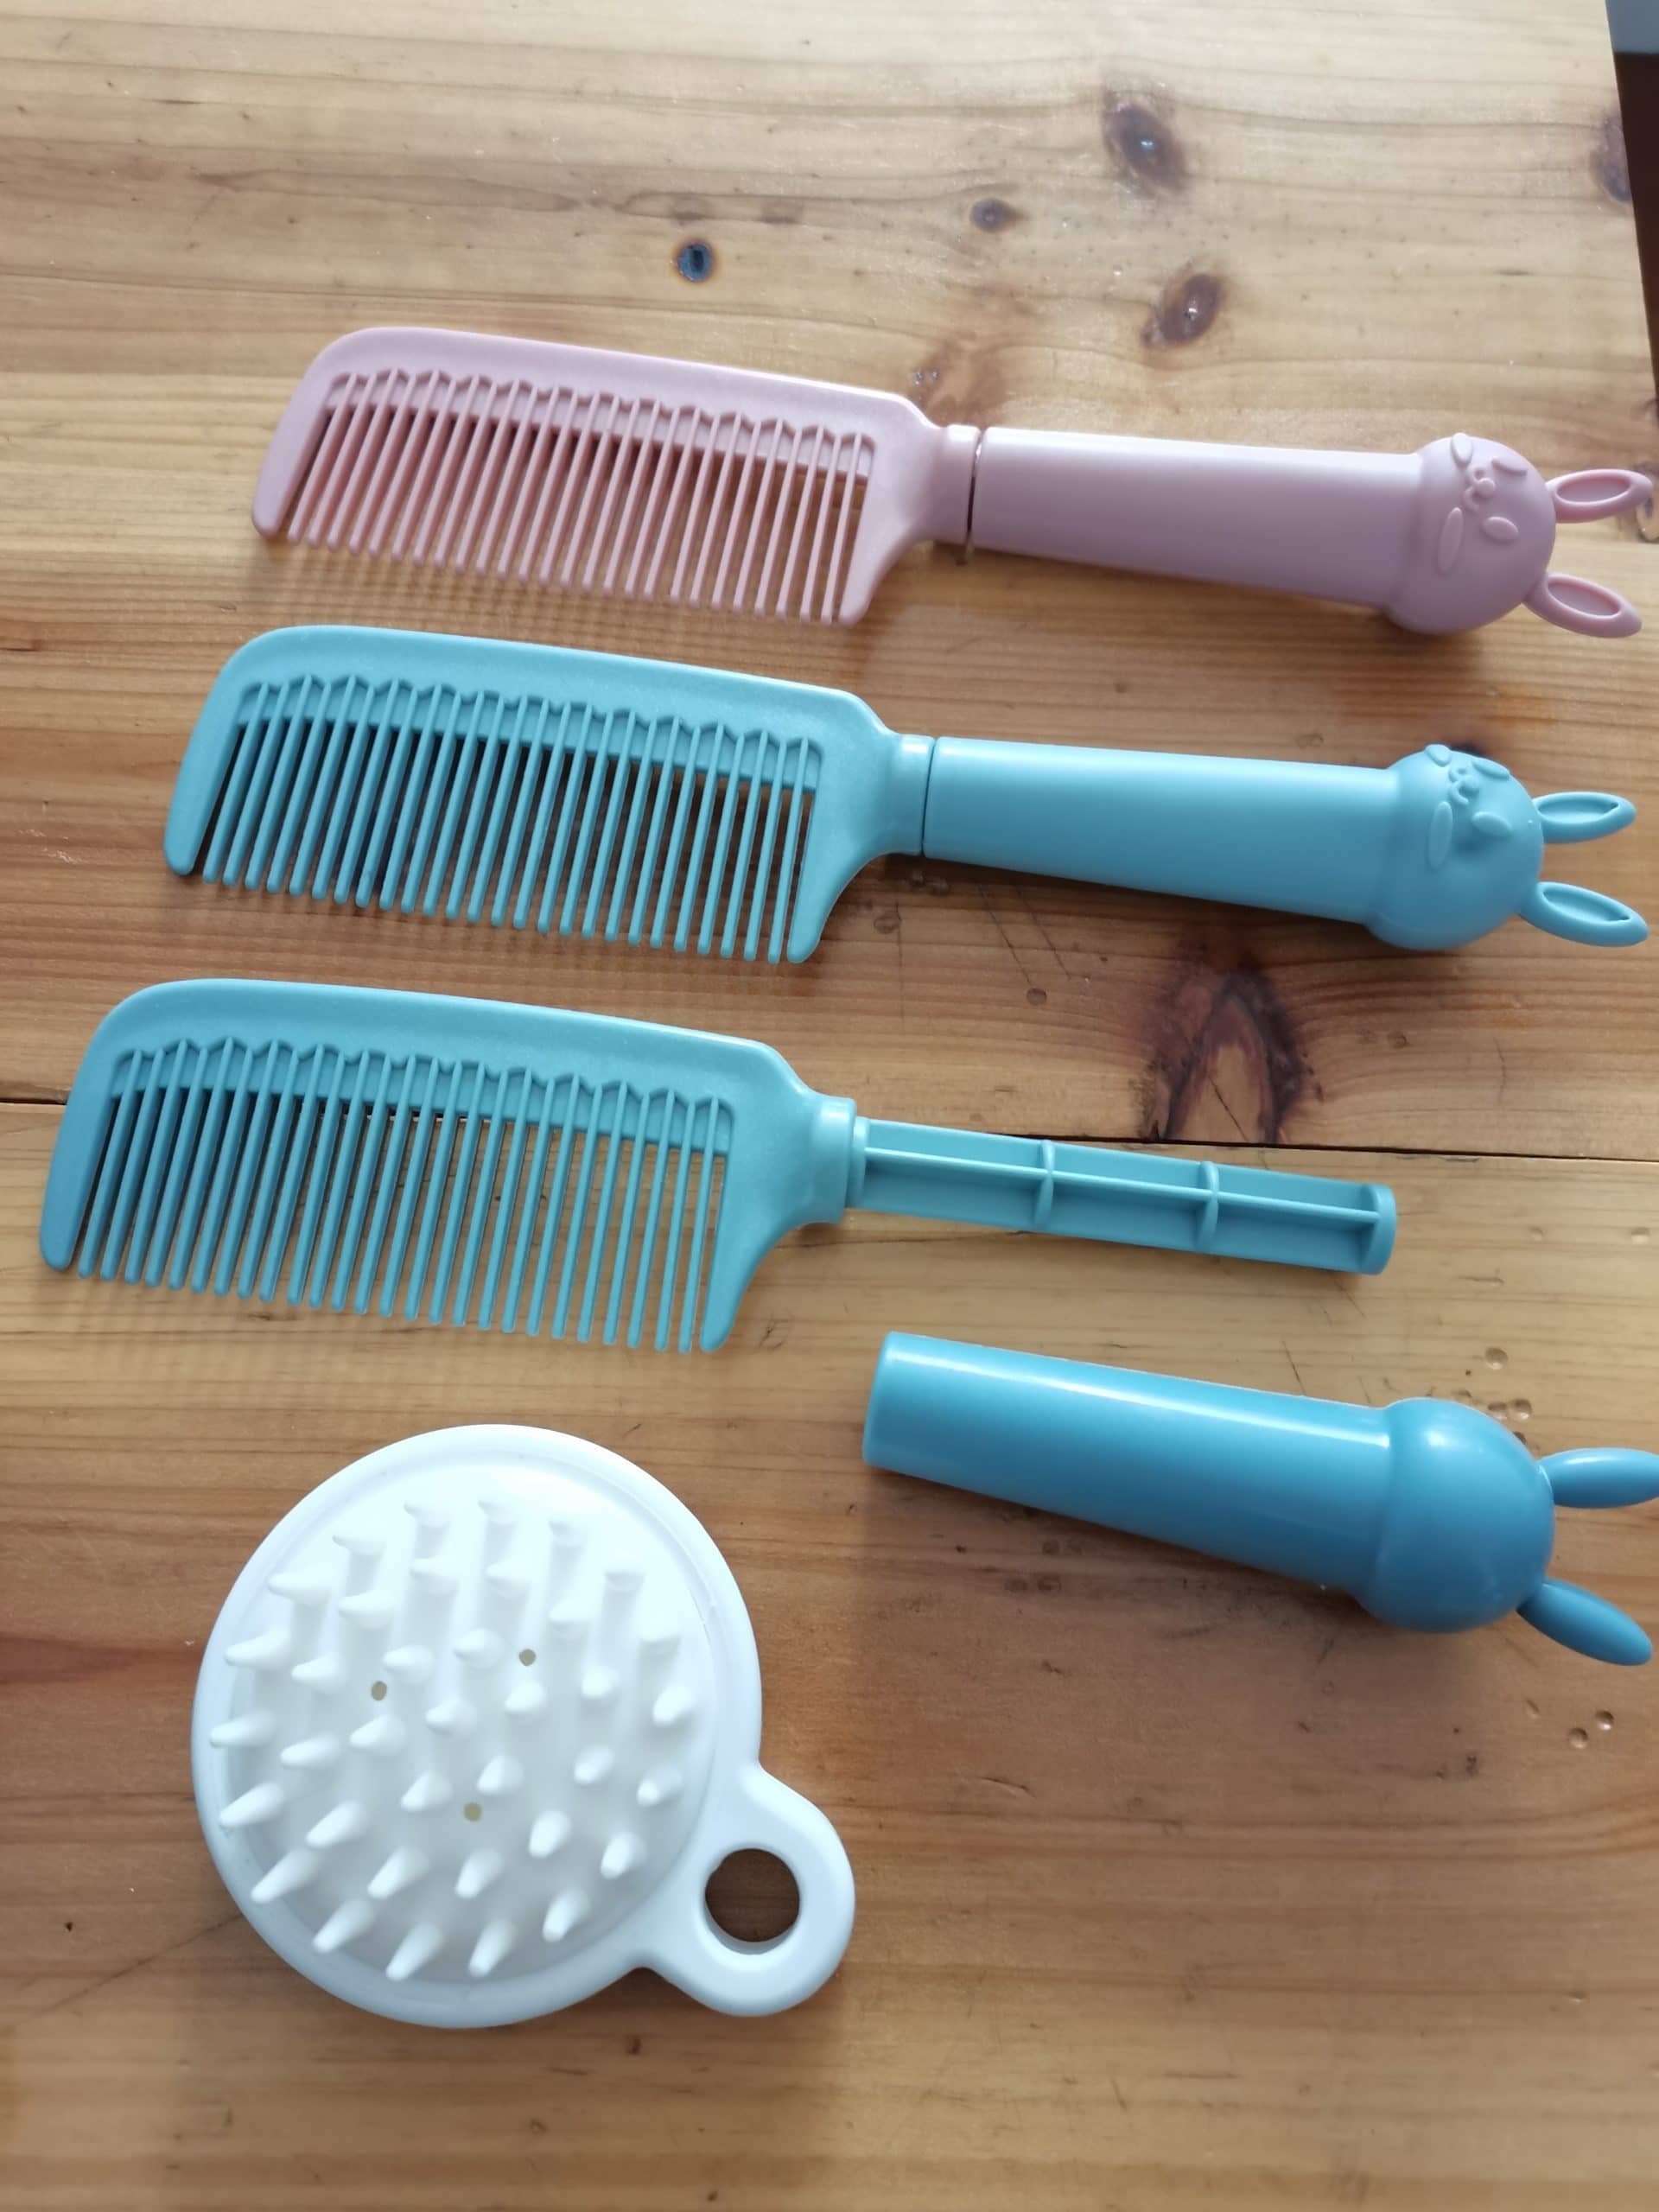 Plastic combs and brush